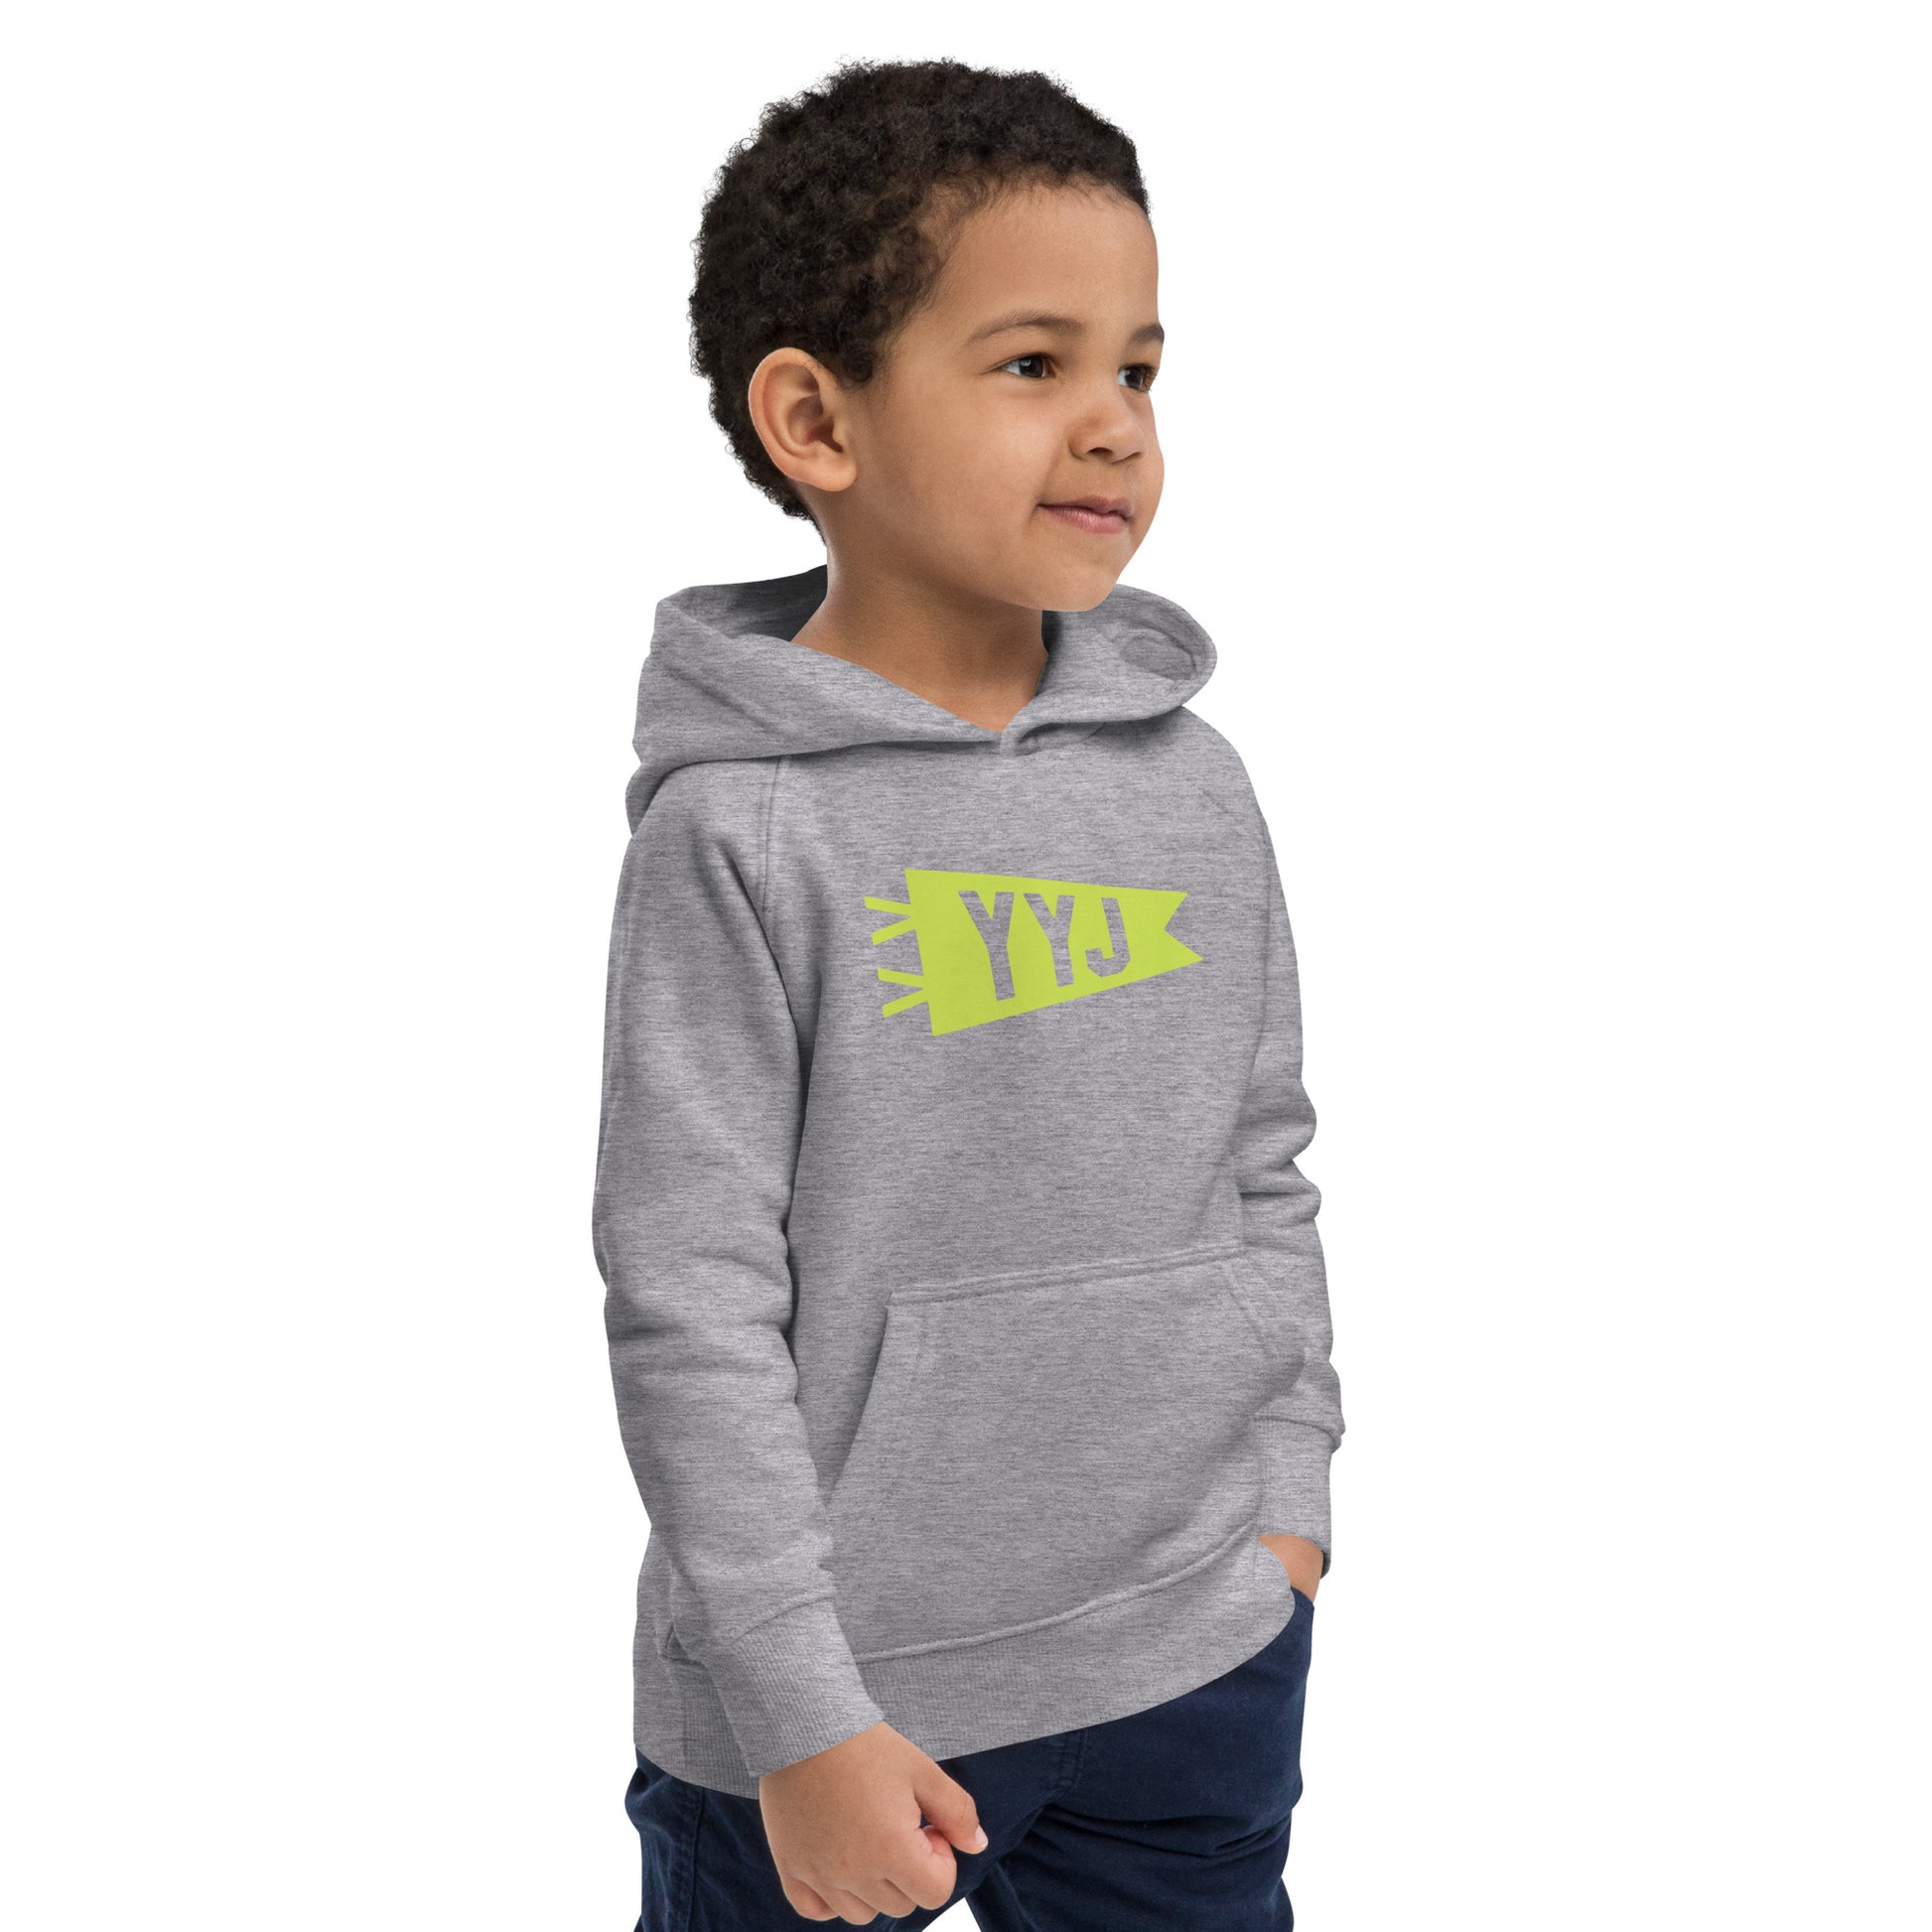 Kid's Sustainable Hoodie - Green Graphic • YYJ Victoria • YHM Designs - Image 13